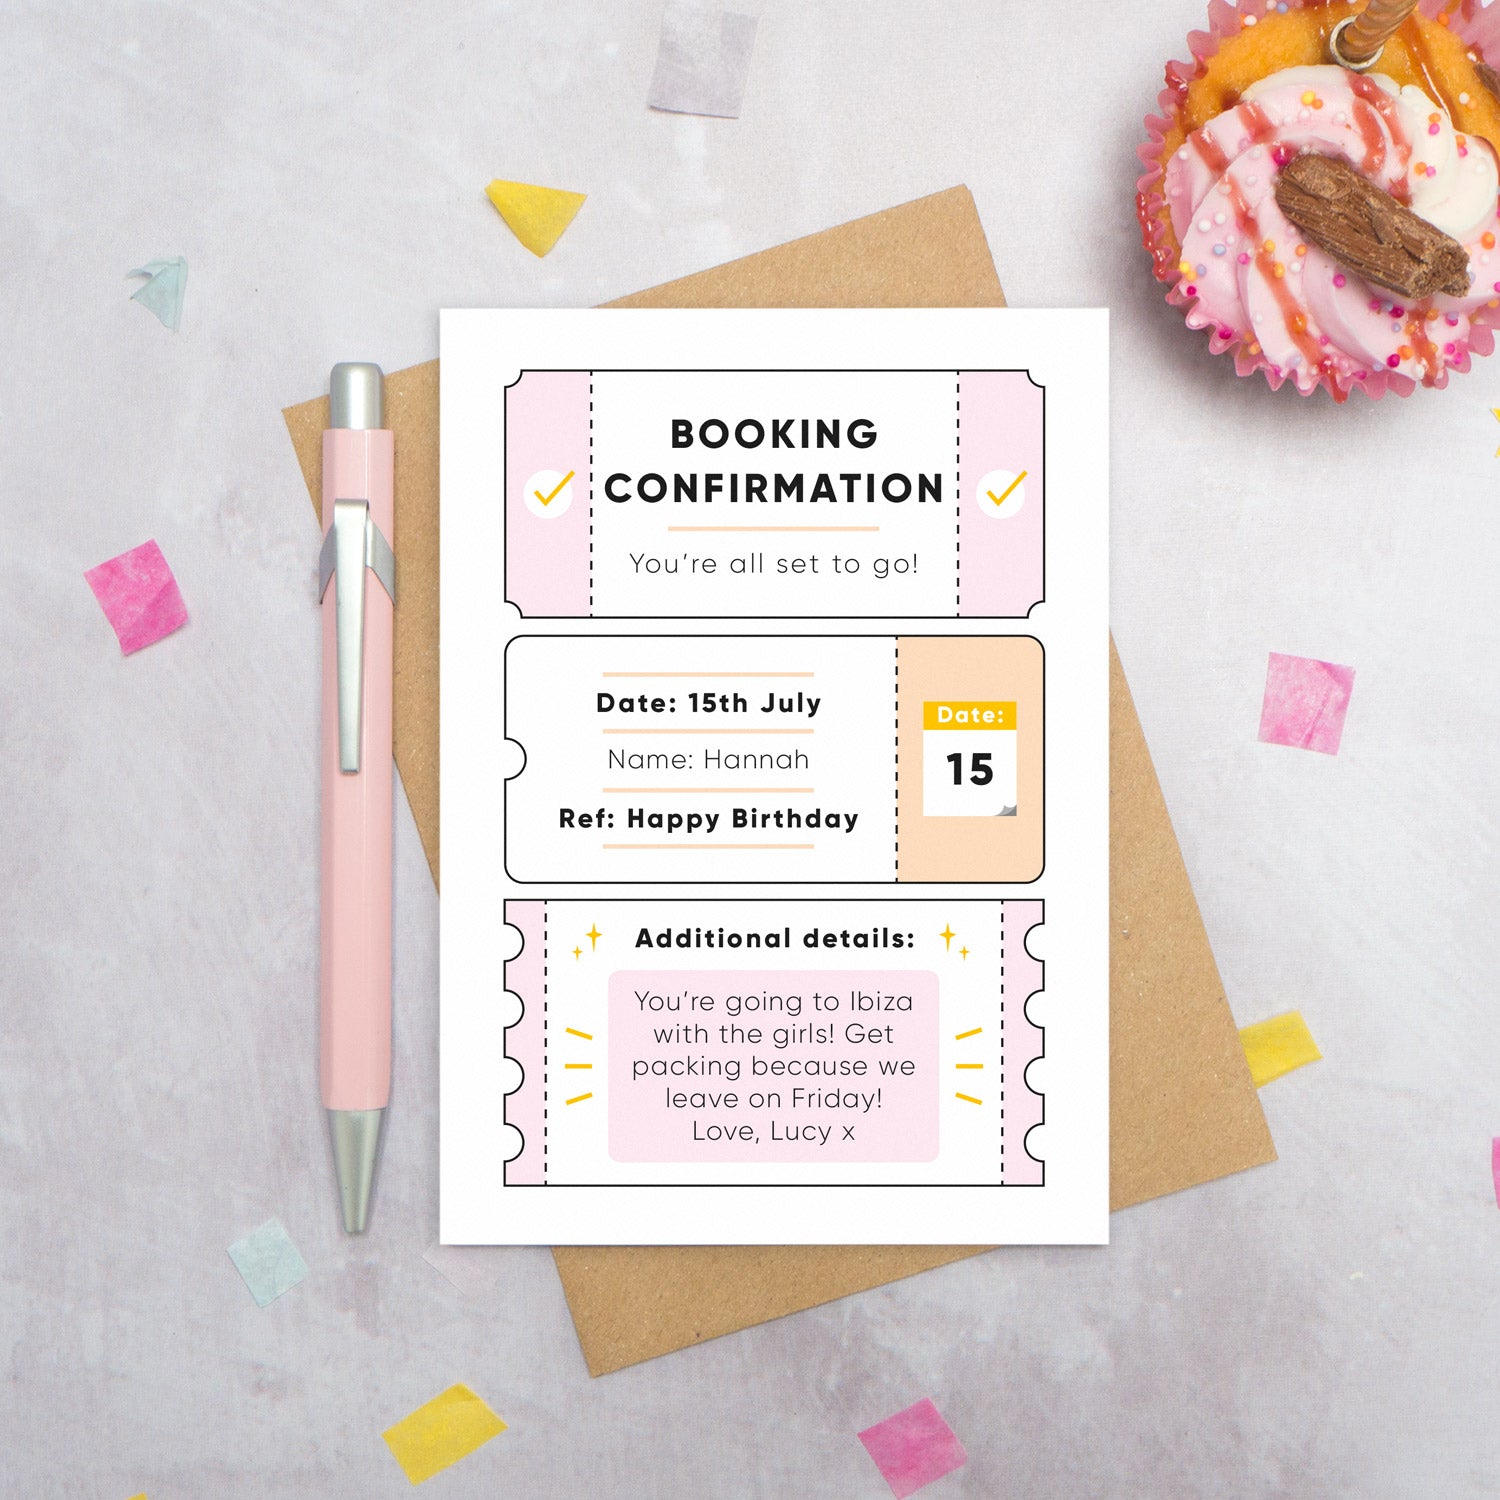 A personalised birthday booking confirmation gift card lying flat lay on a grey surface surrounded by confetti, a cupcake and a pink pen. The card is lying on it’s kraft brown envelope and pictured is the pink version of the gift card.